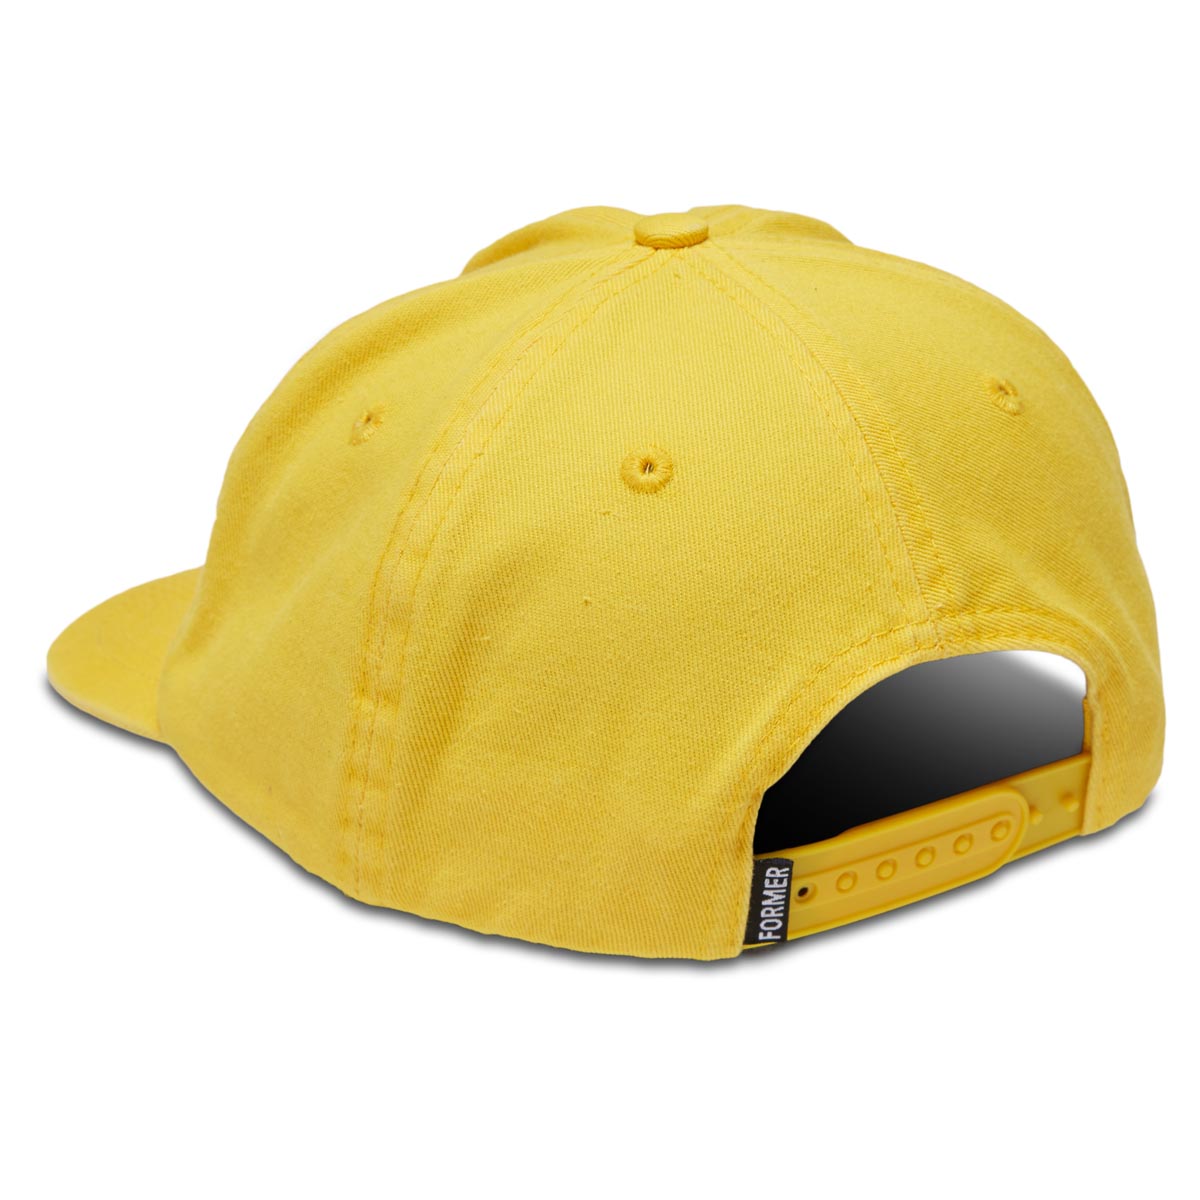 Former Legacy Plate Hat - Mustard image 2